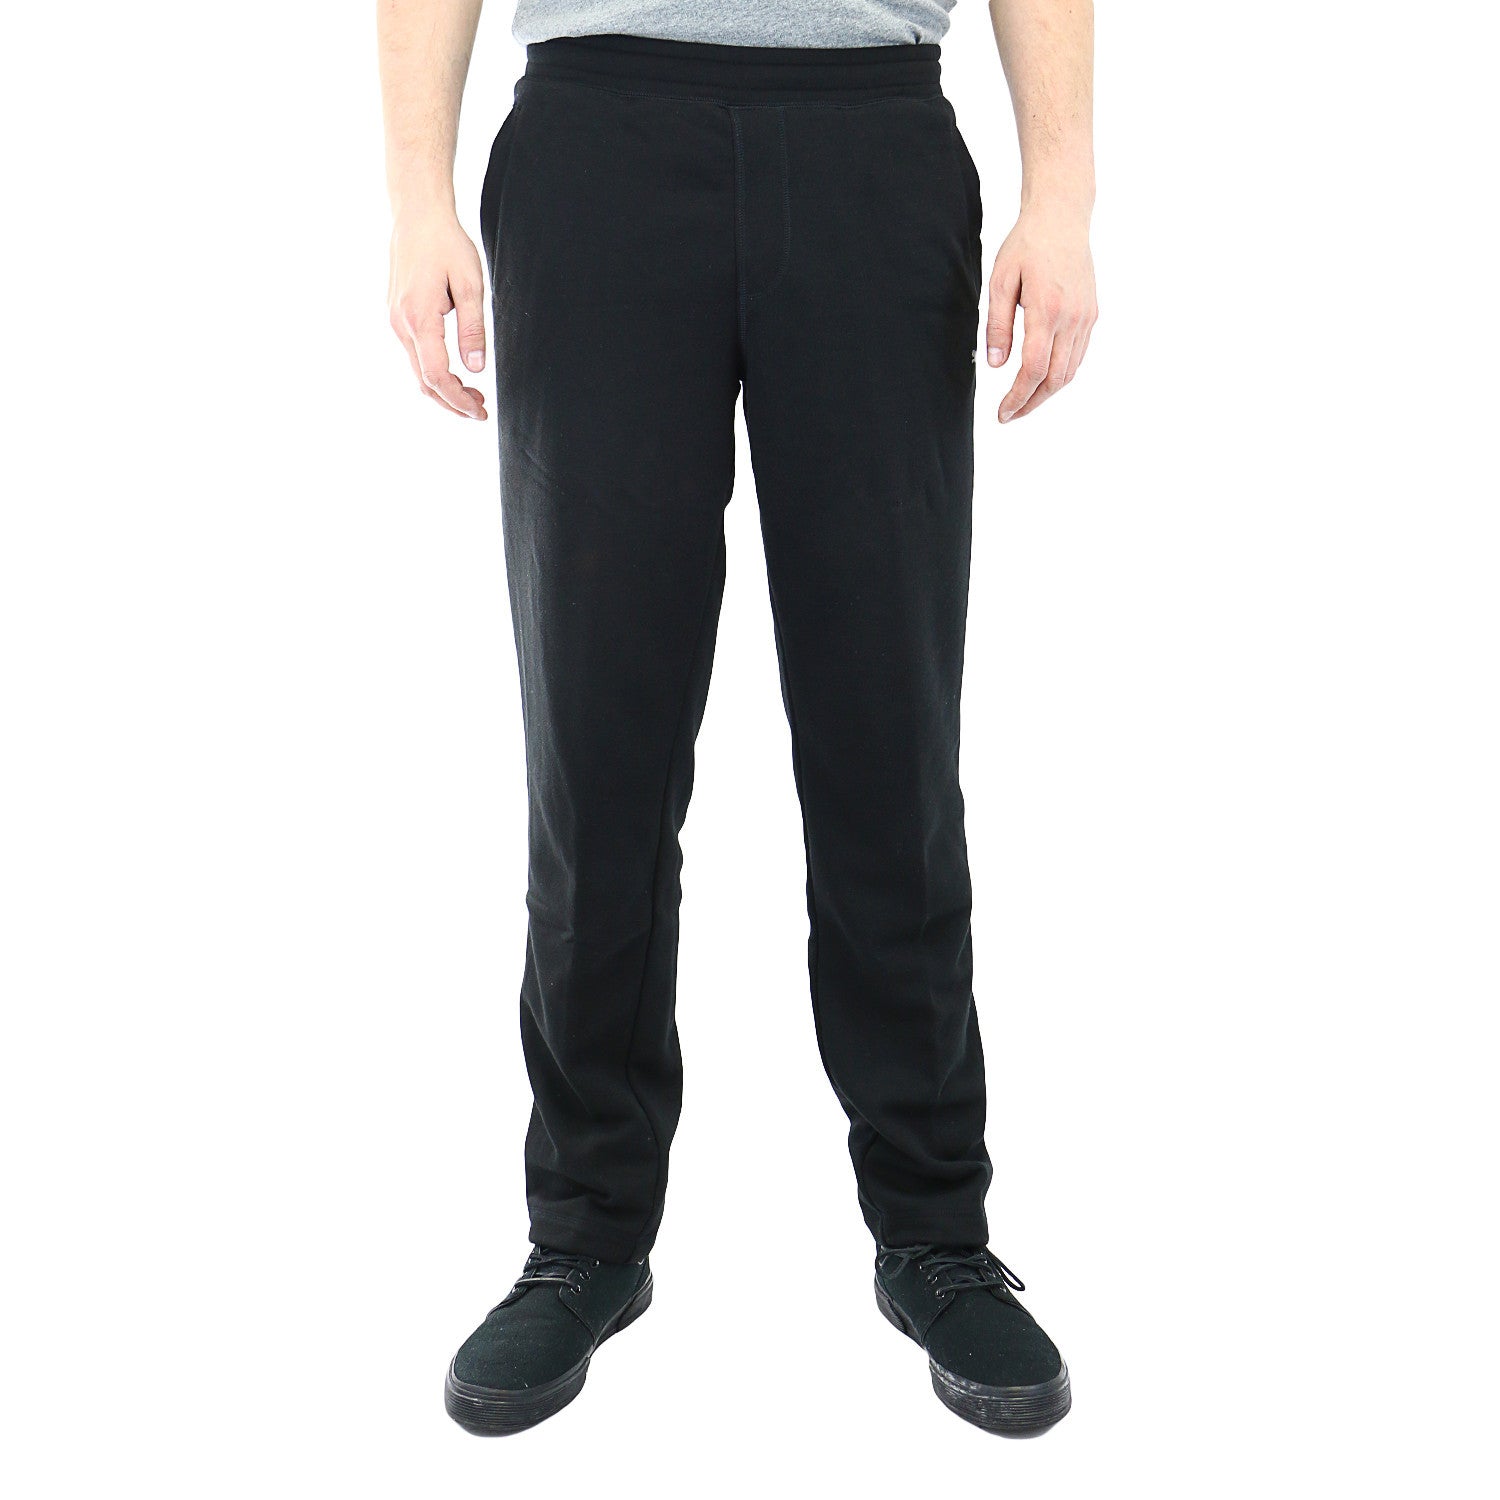 Sweat Track Pants - Buy Sweat Track Pants online in India